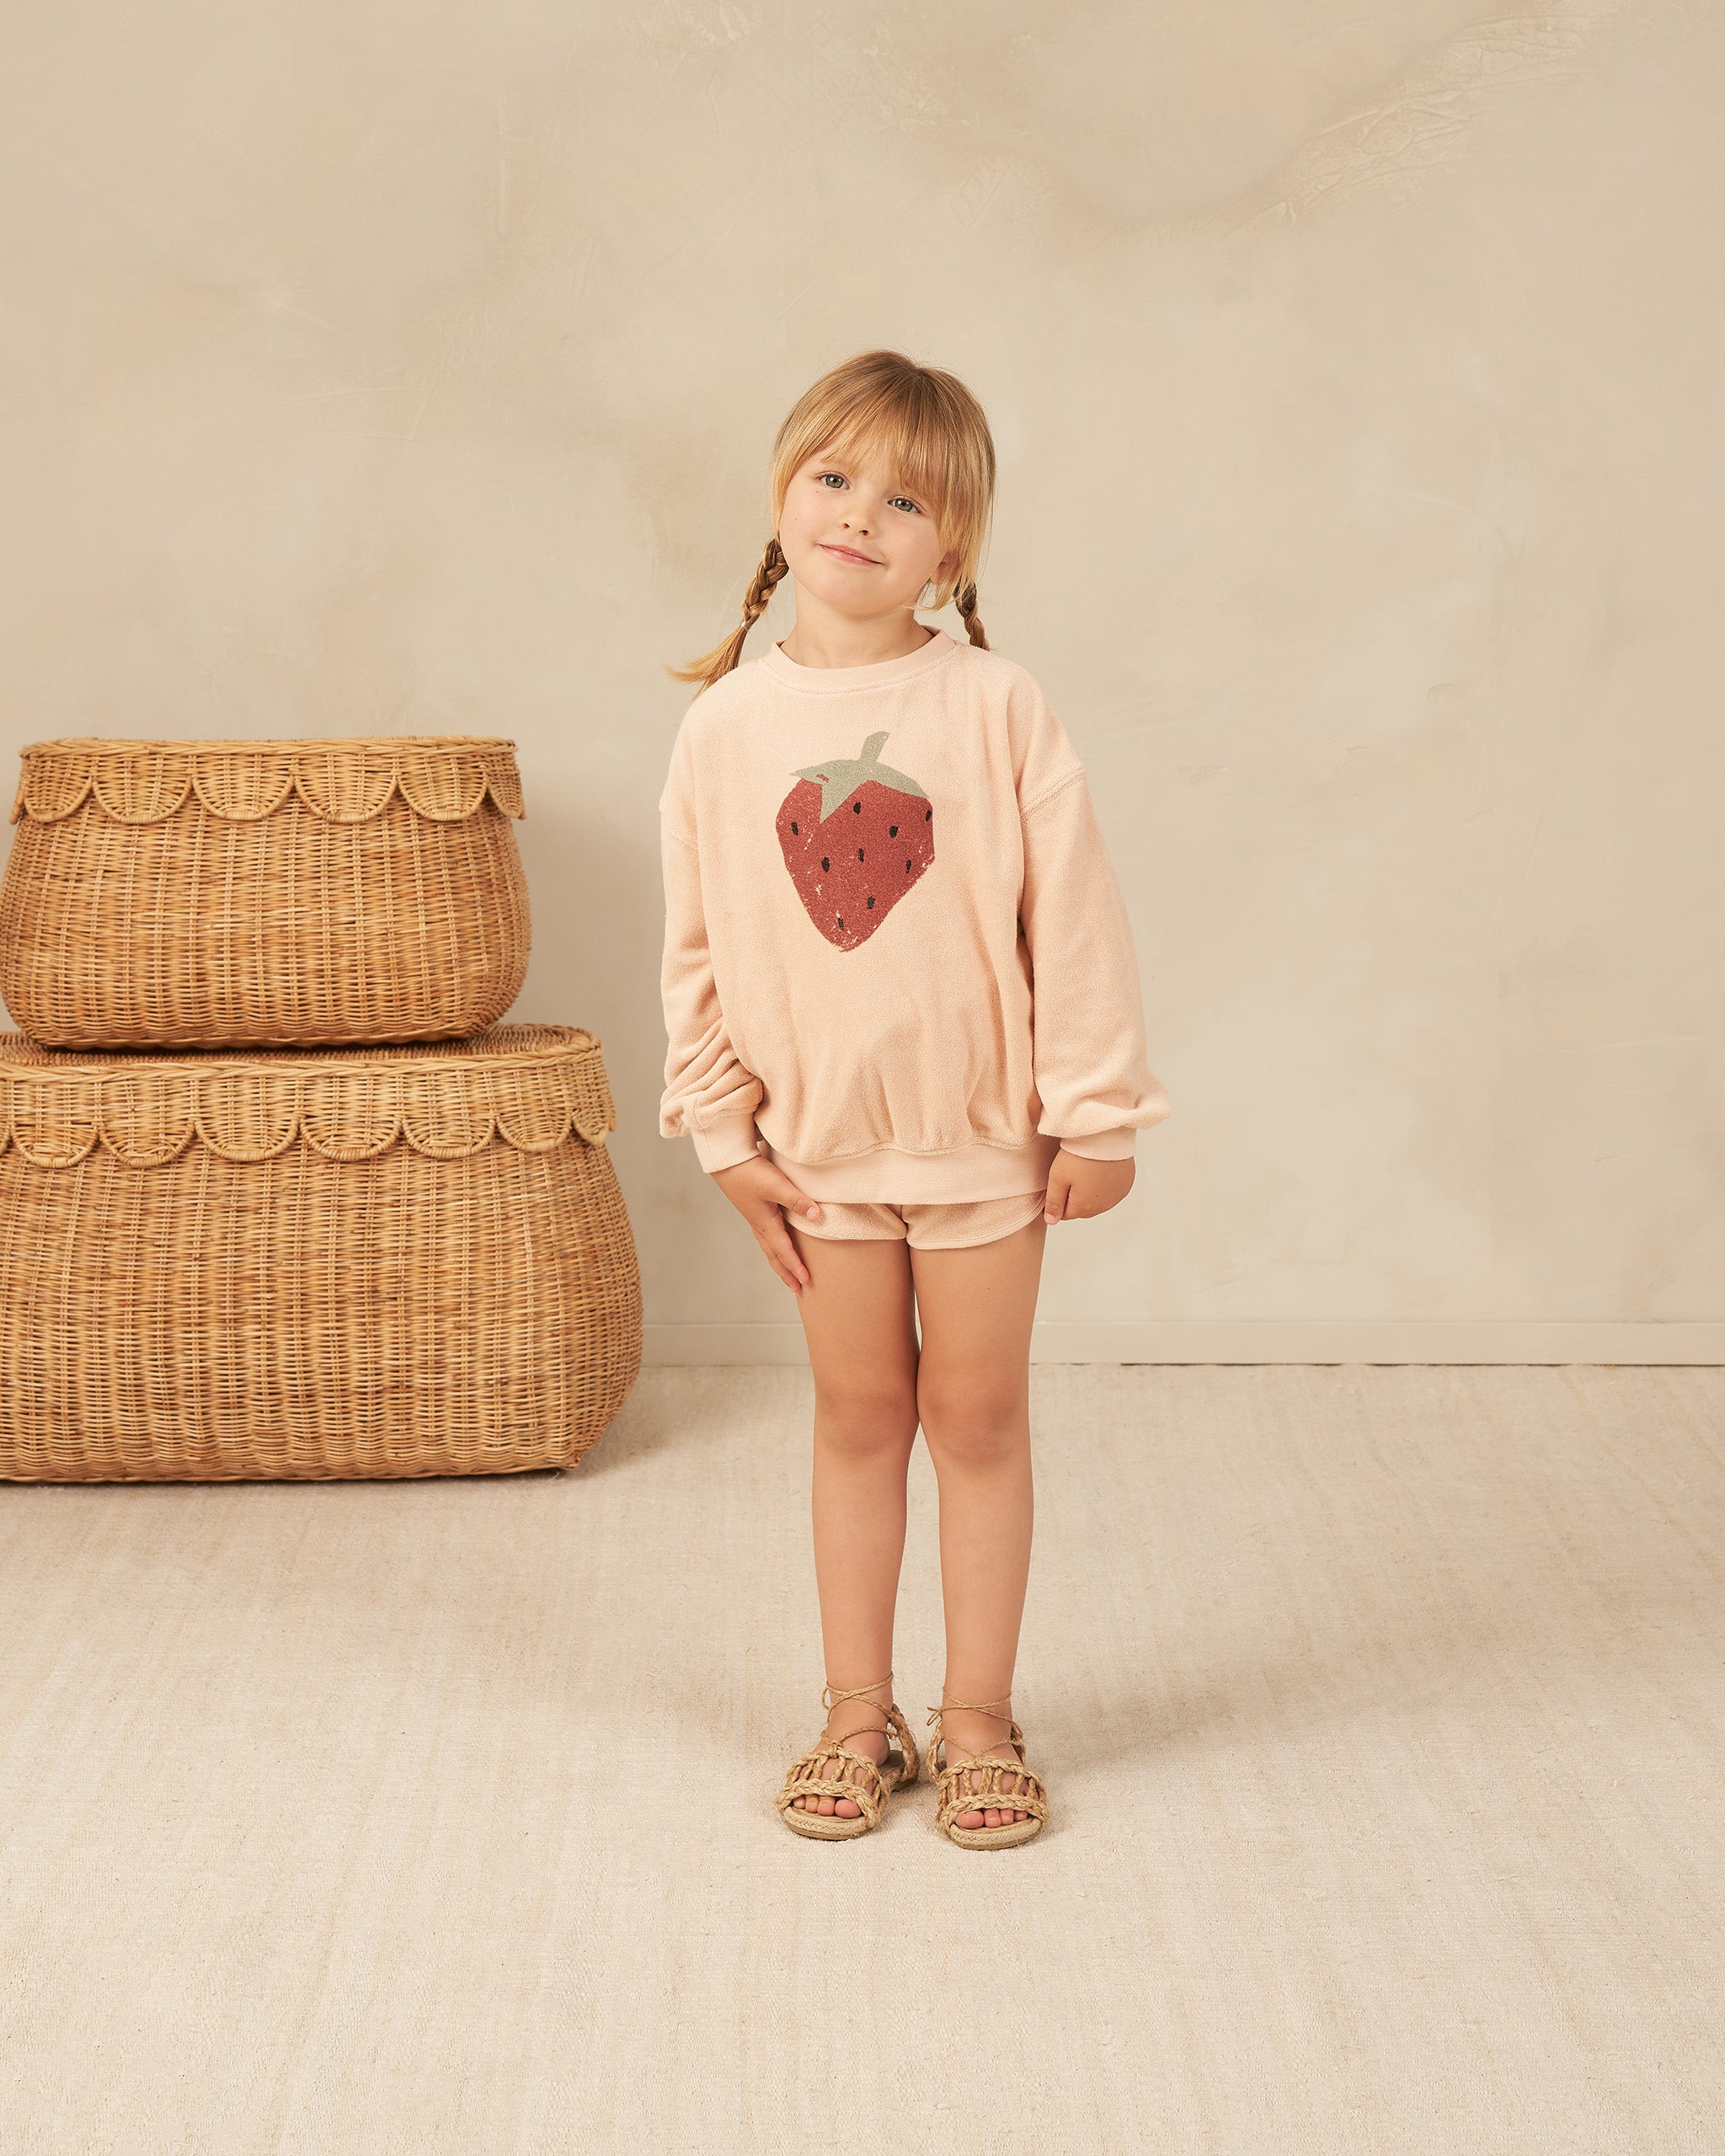 Track Short || Apricot - Rylee + Cru | Kids Clothes | Trendy Baby Clothes | Modern Infant Outfits |